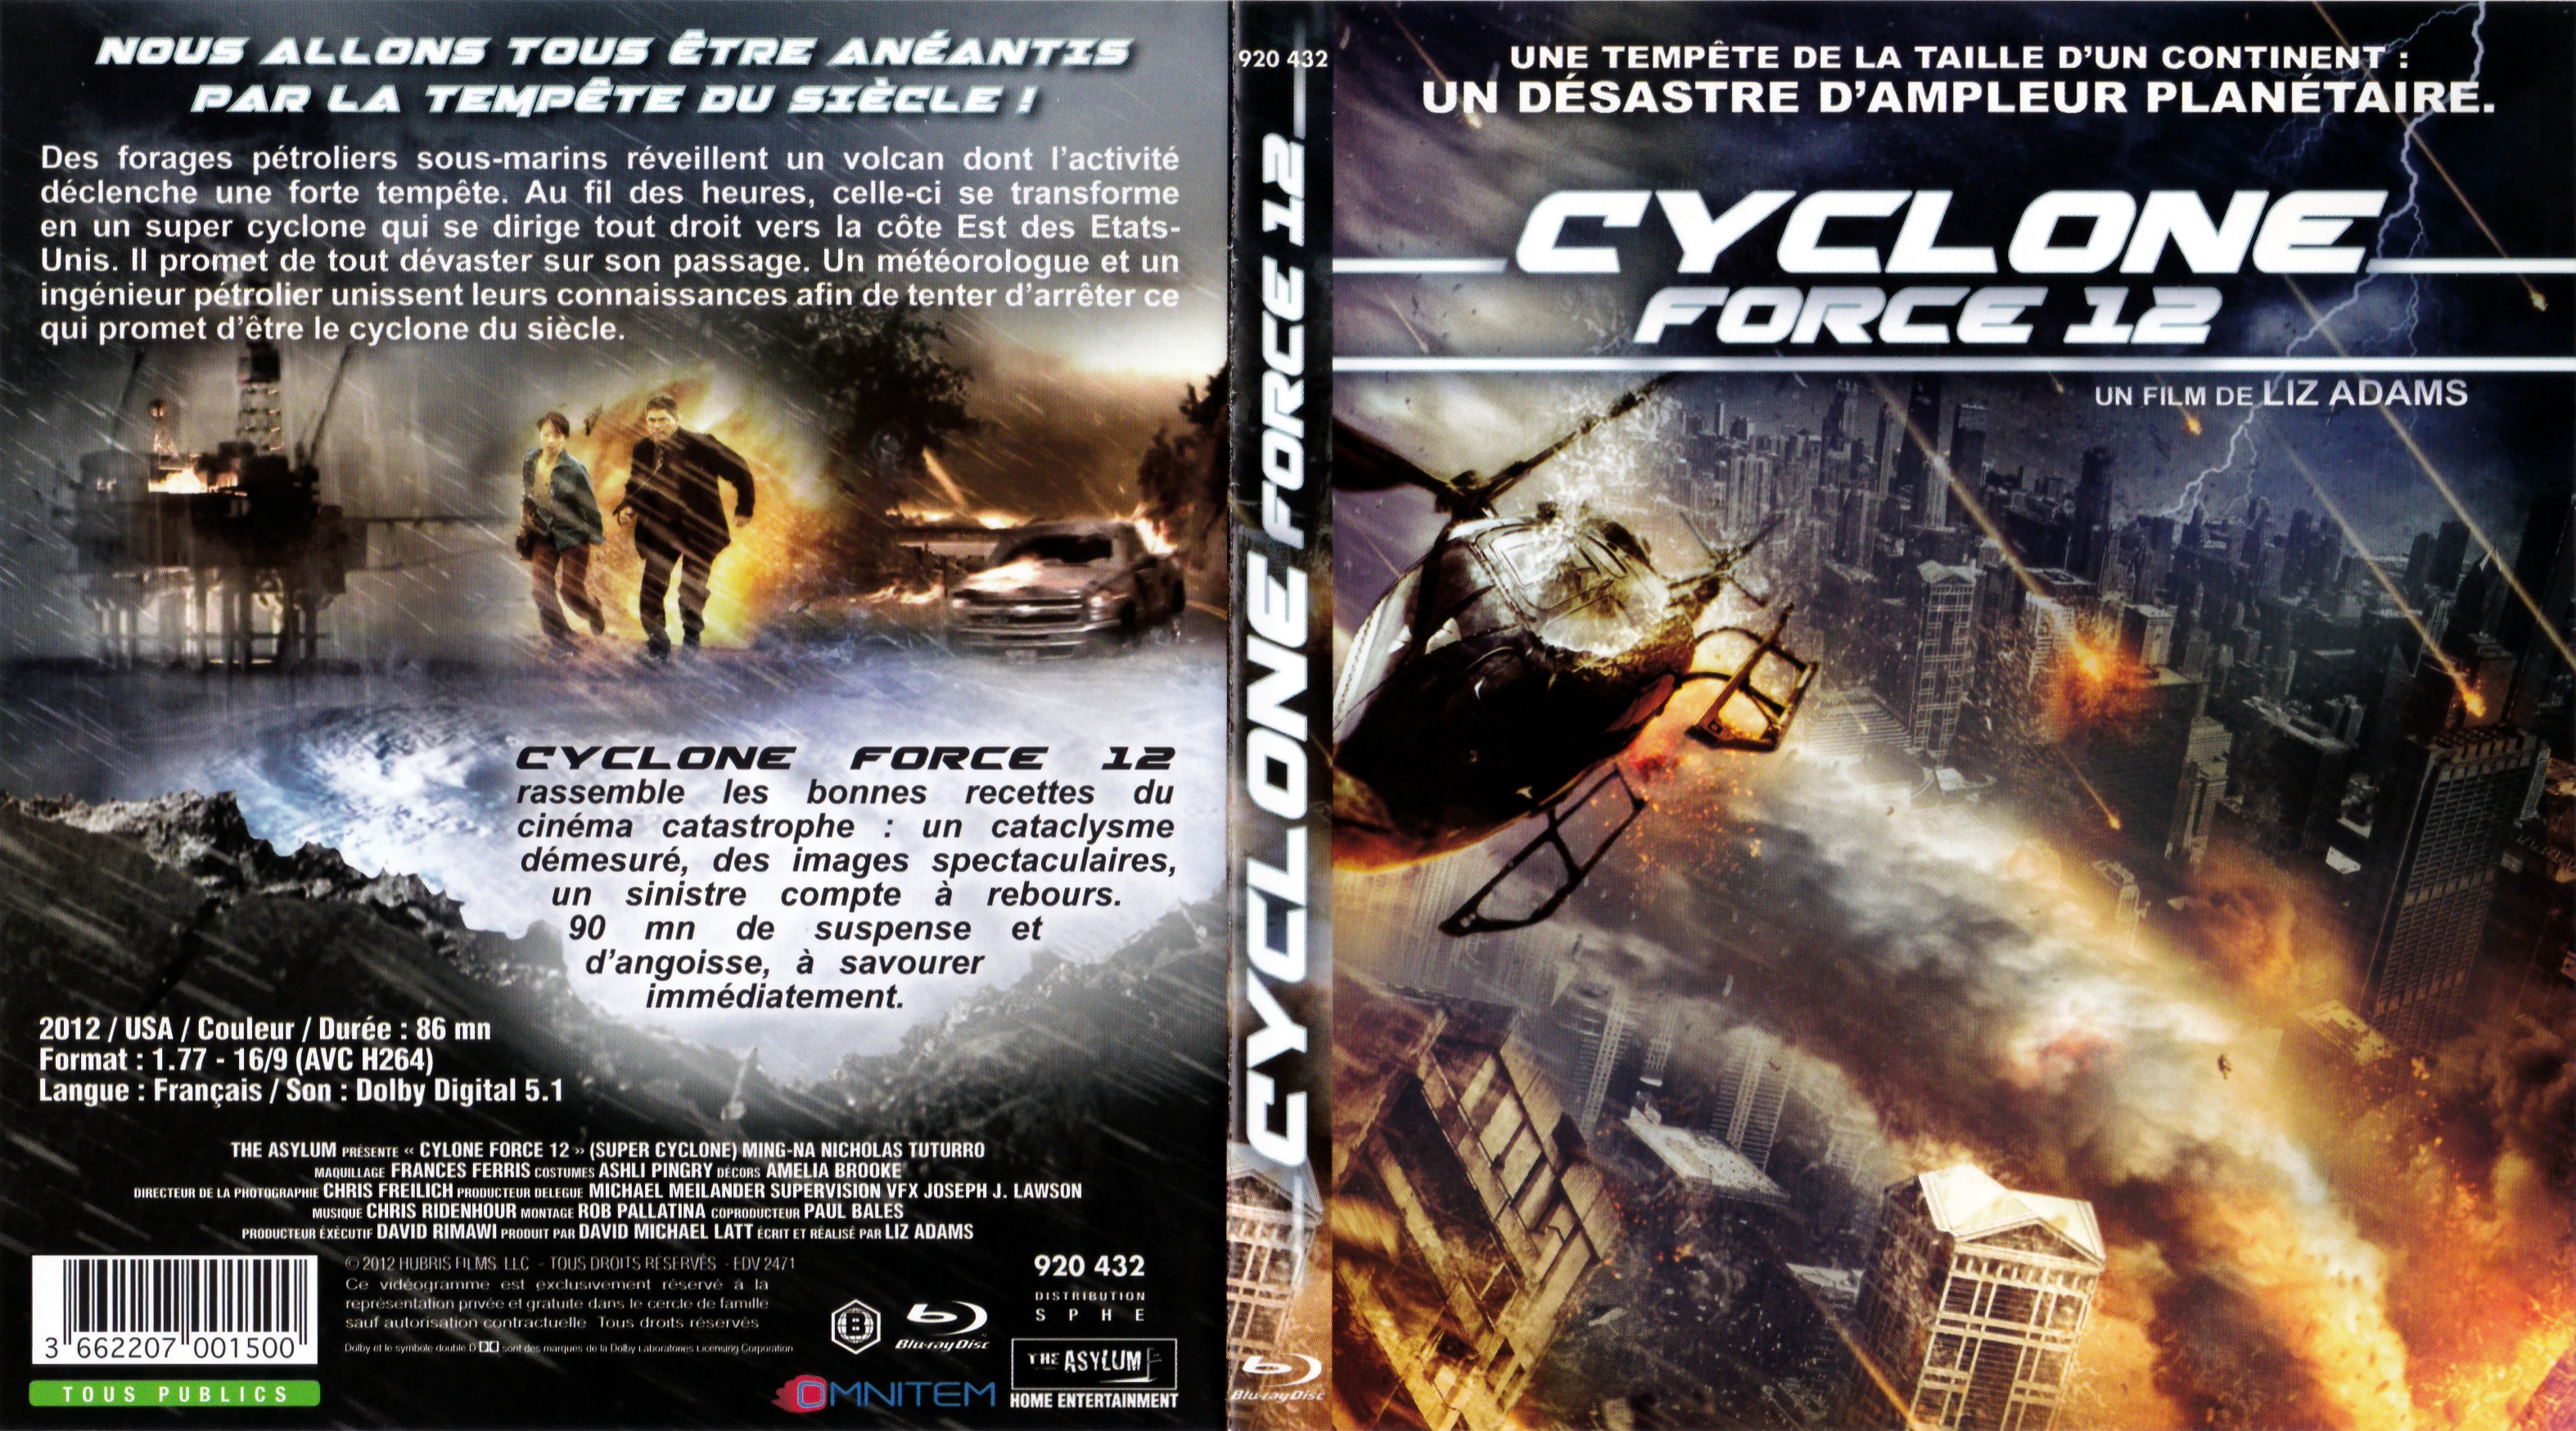 Jaquette DVD Cyclone force 12 (BLU-RAY)